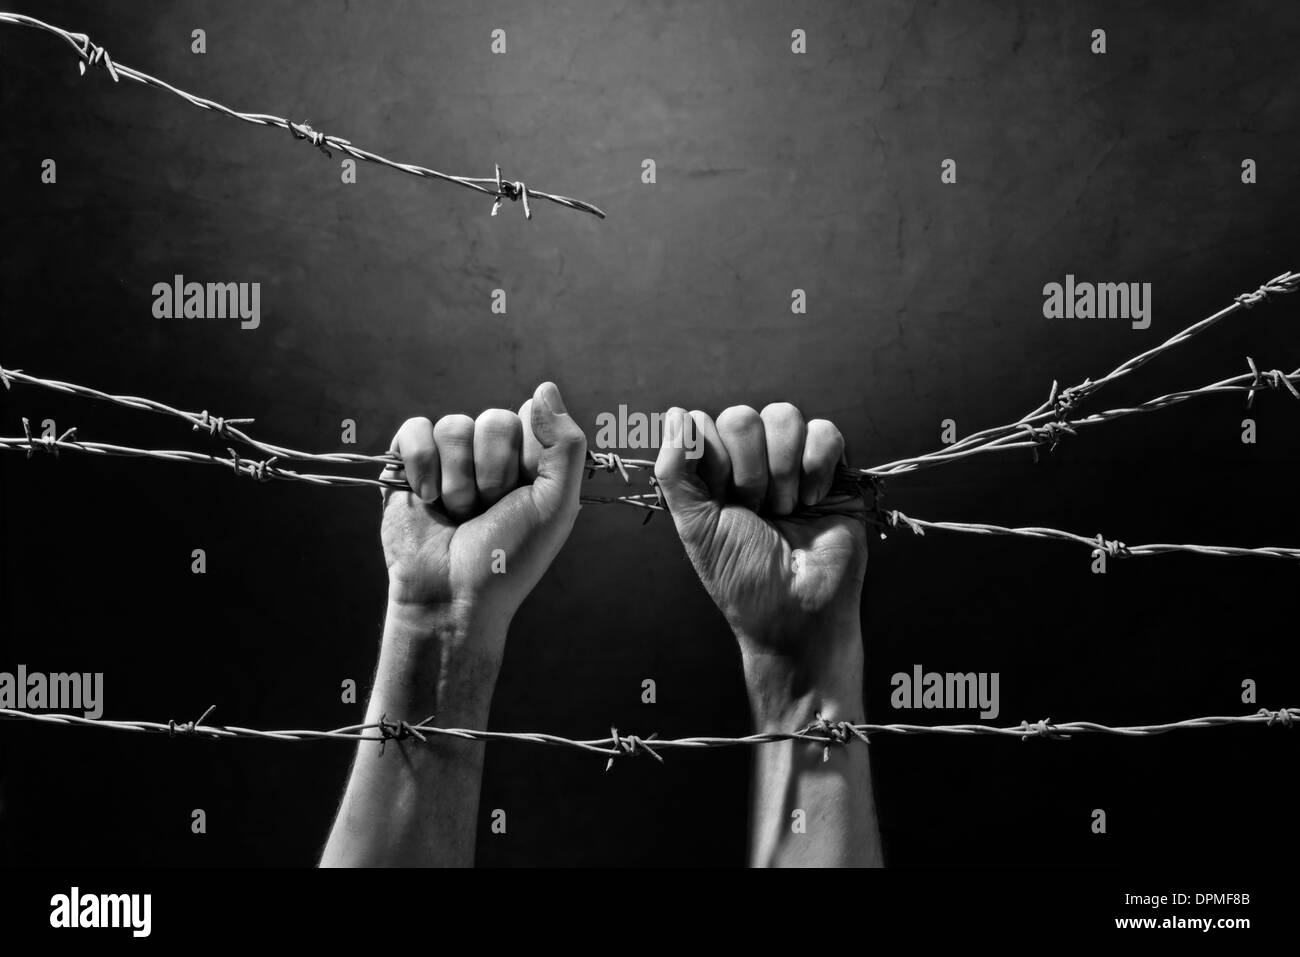 hands behind barbed wire with dark background Stock Photo